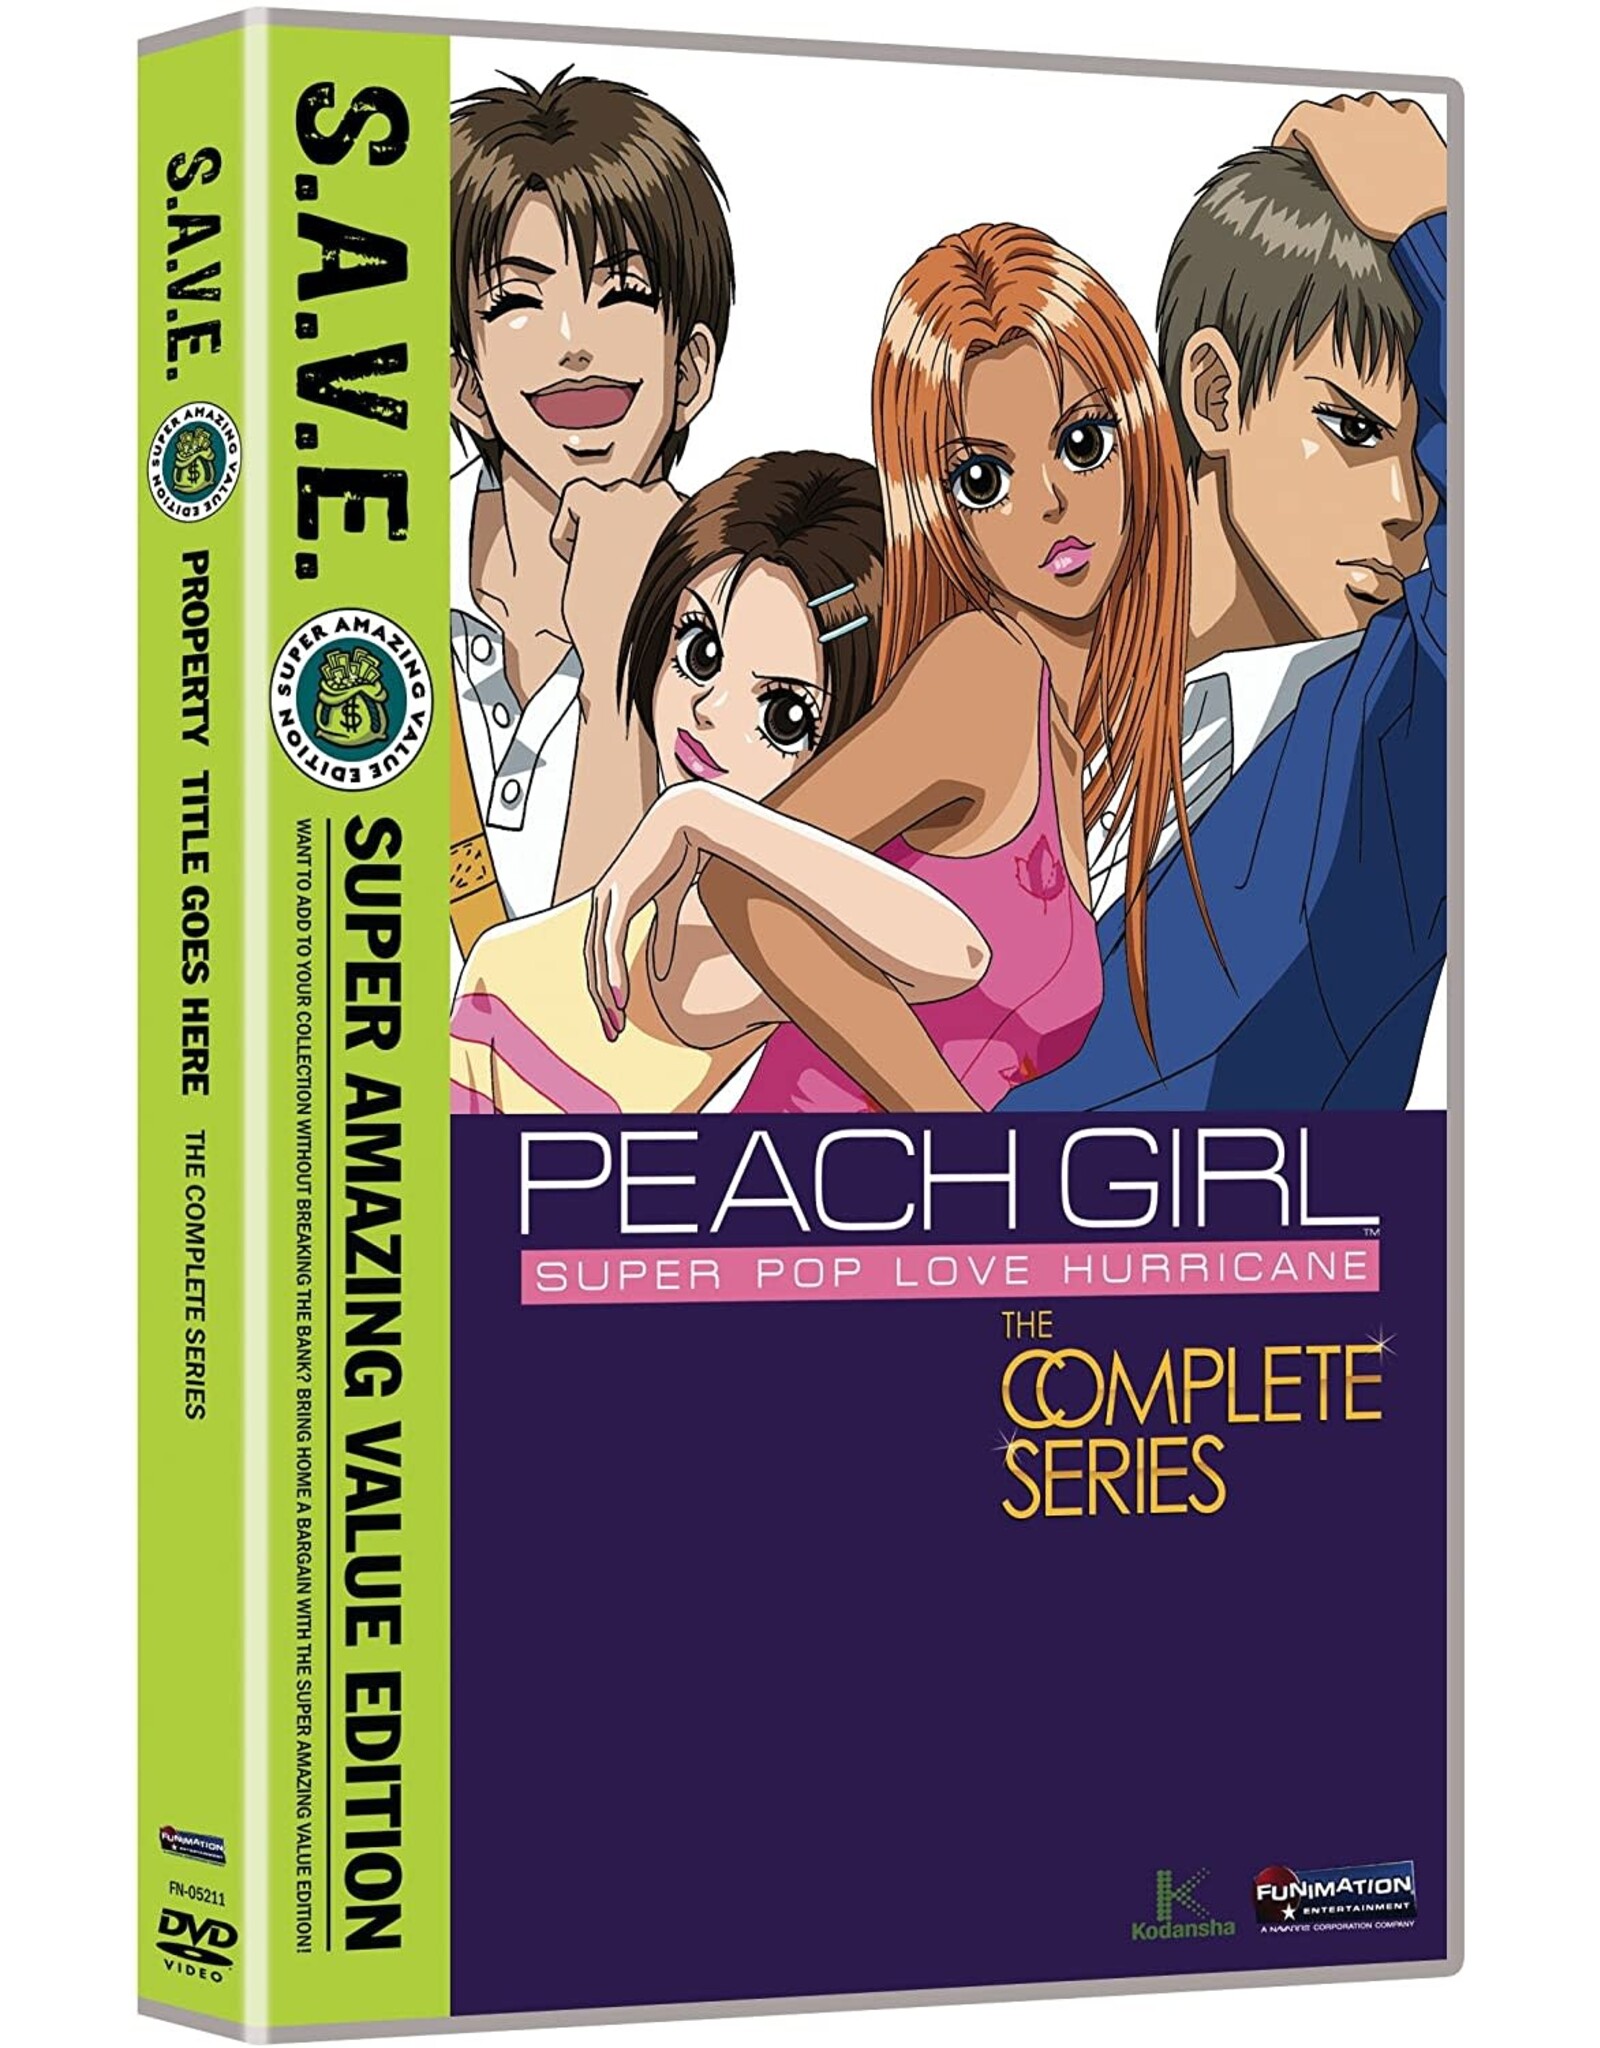 Anime & Animation Peach Girl The Complete Series (Used)